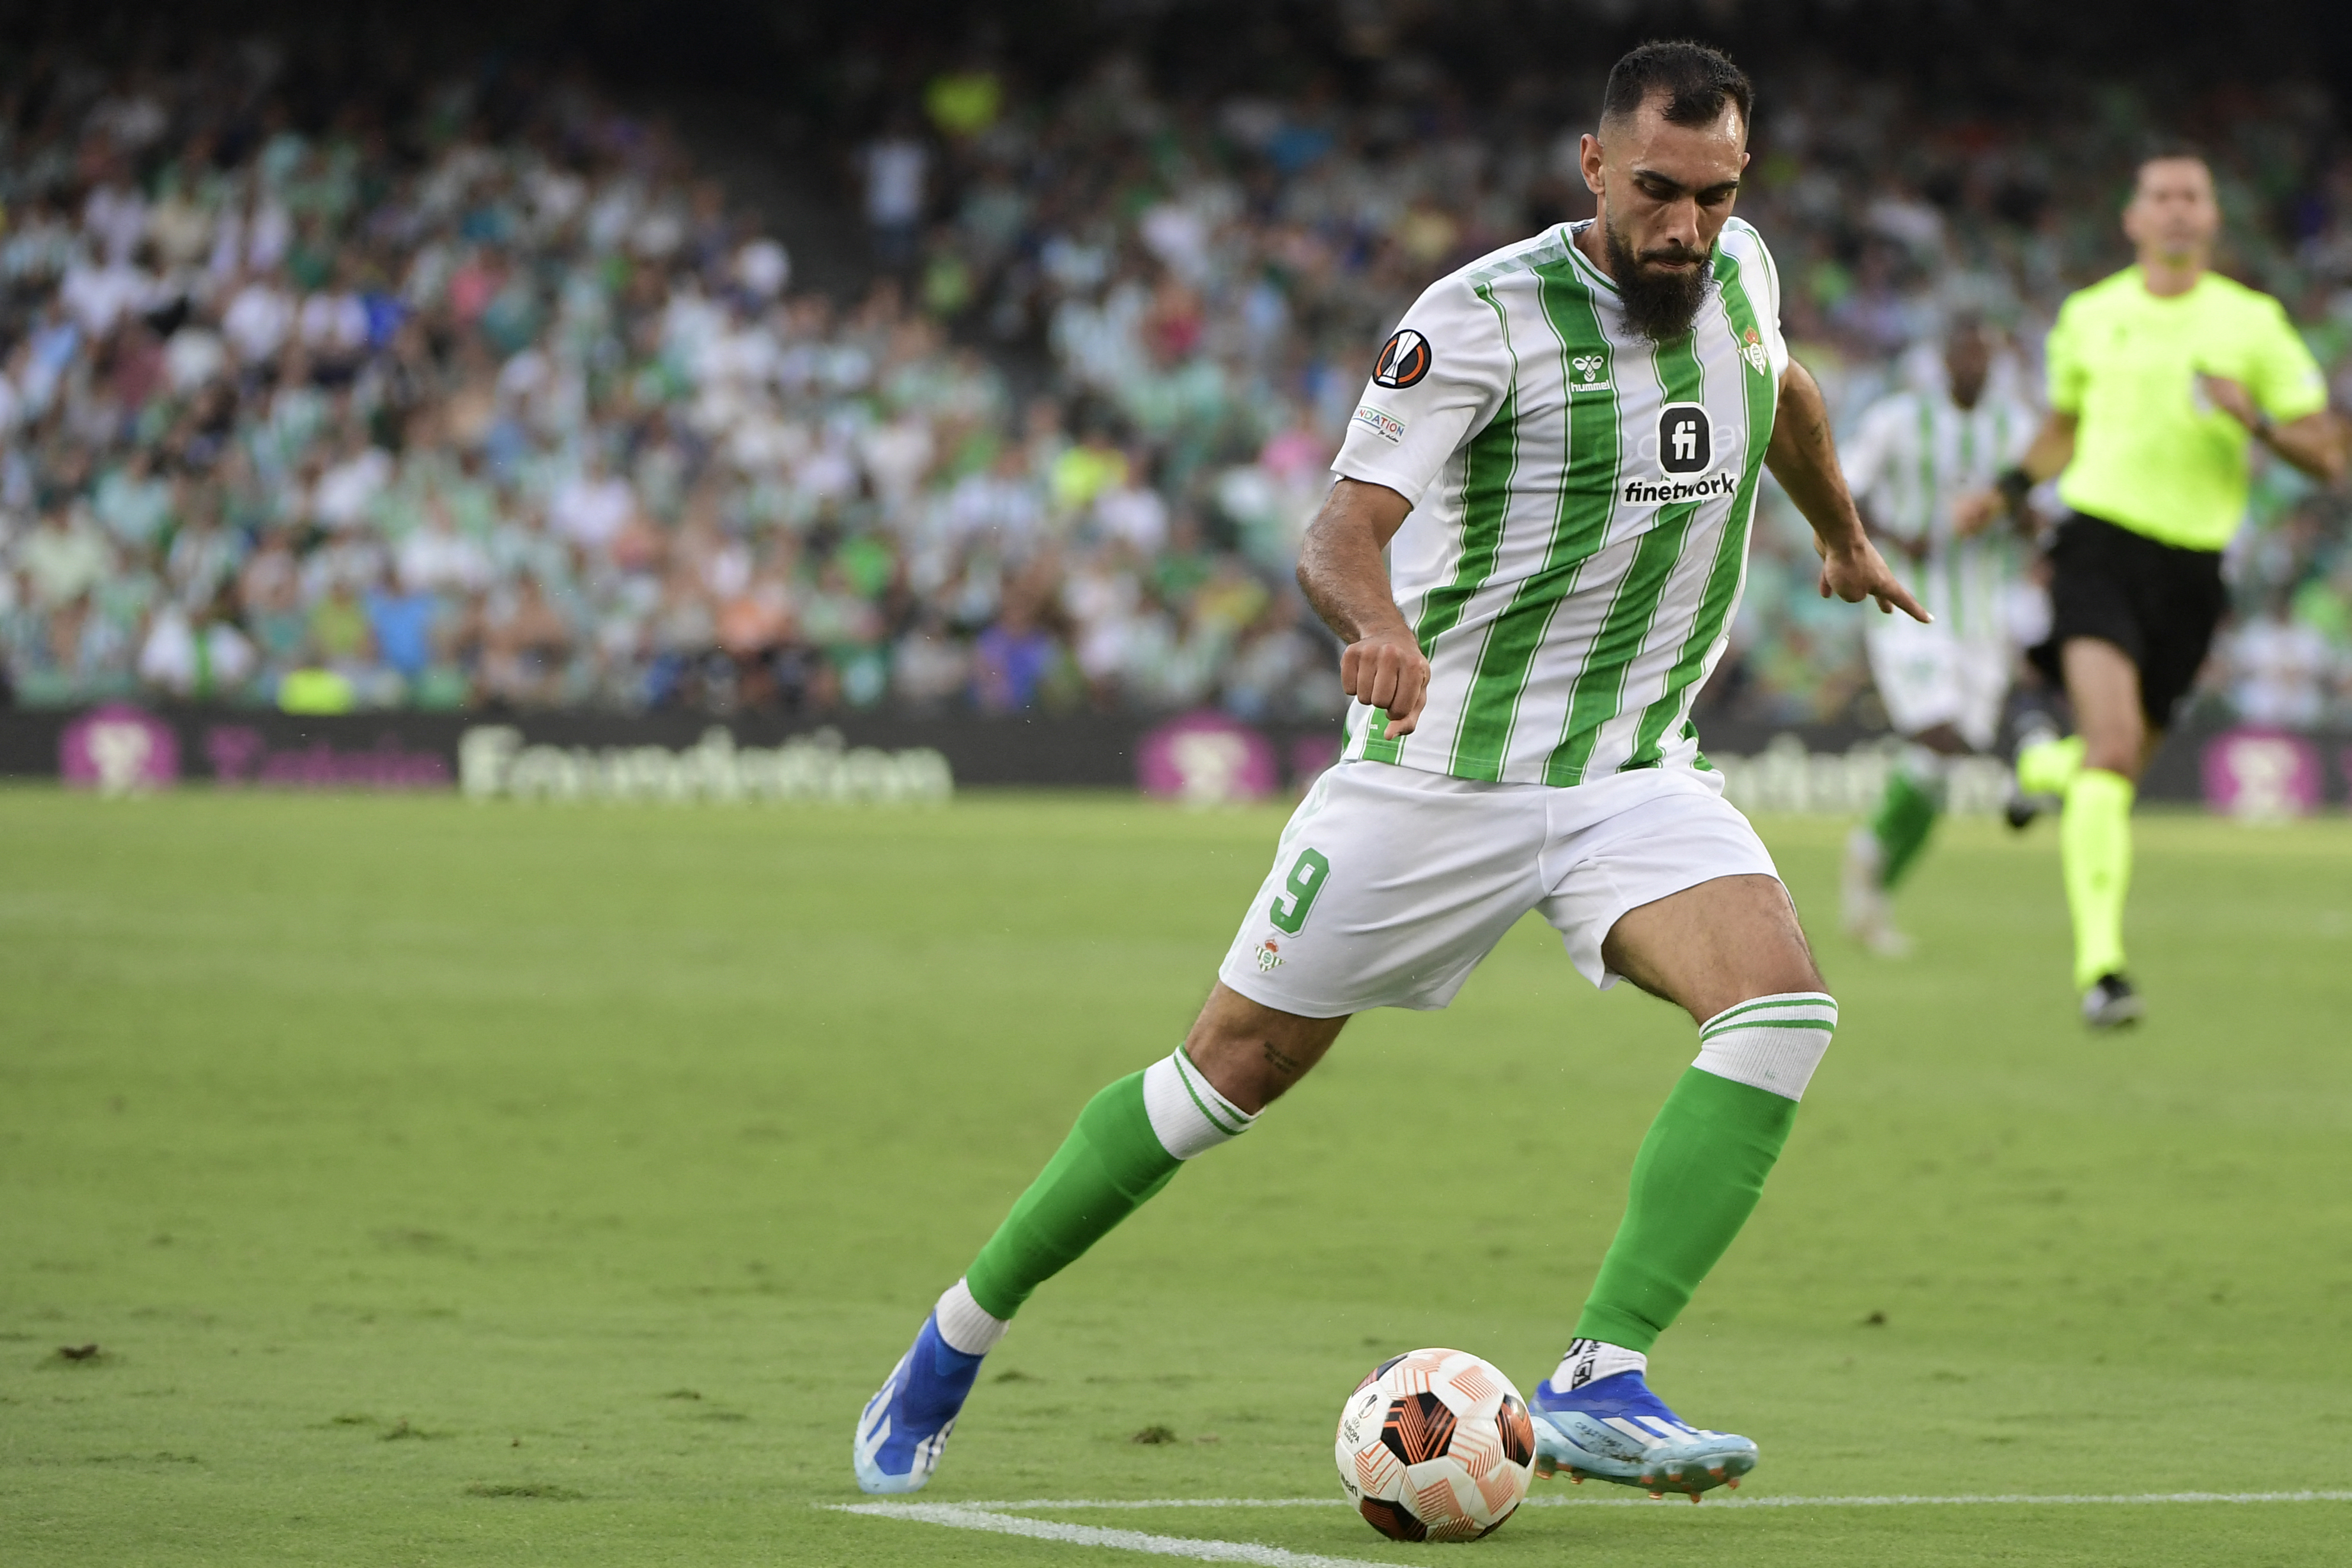 BEHIND THE SCENES, Real Betis - Deportivo Alavés